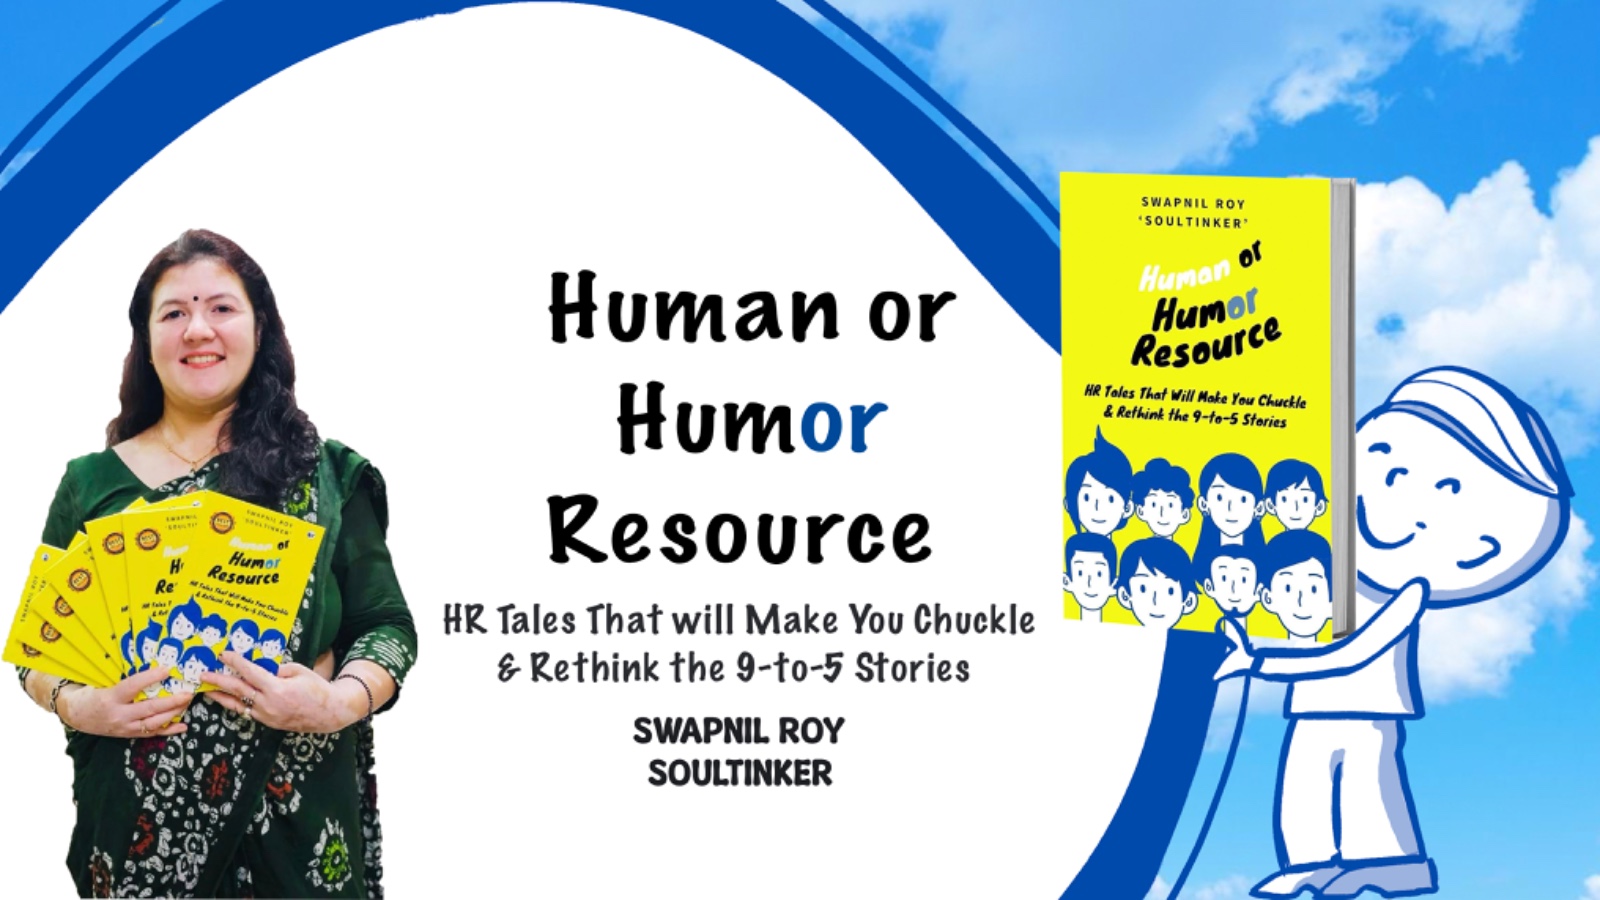 Human or Humor Resource: HR Tales That Will Make You Chuckle & Rethink the 9-to-5 Stories